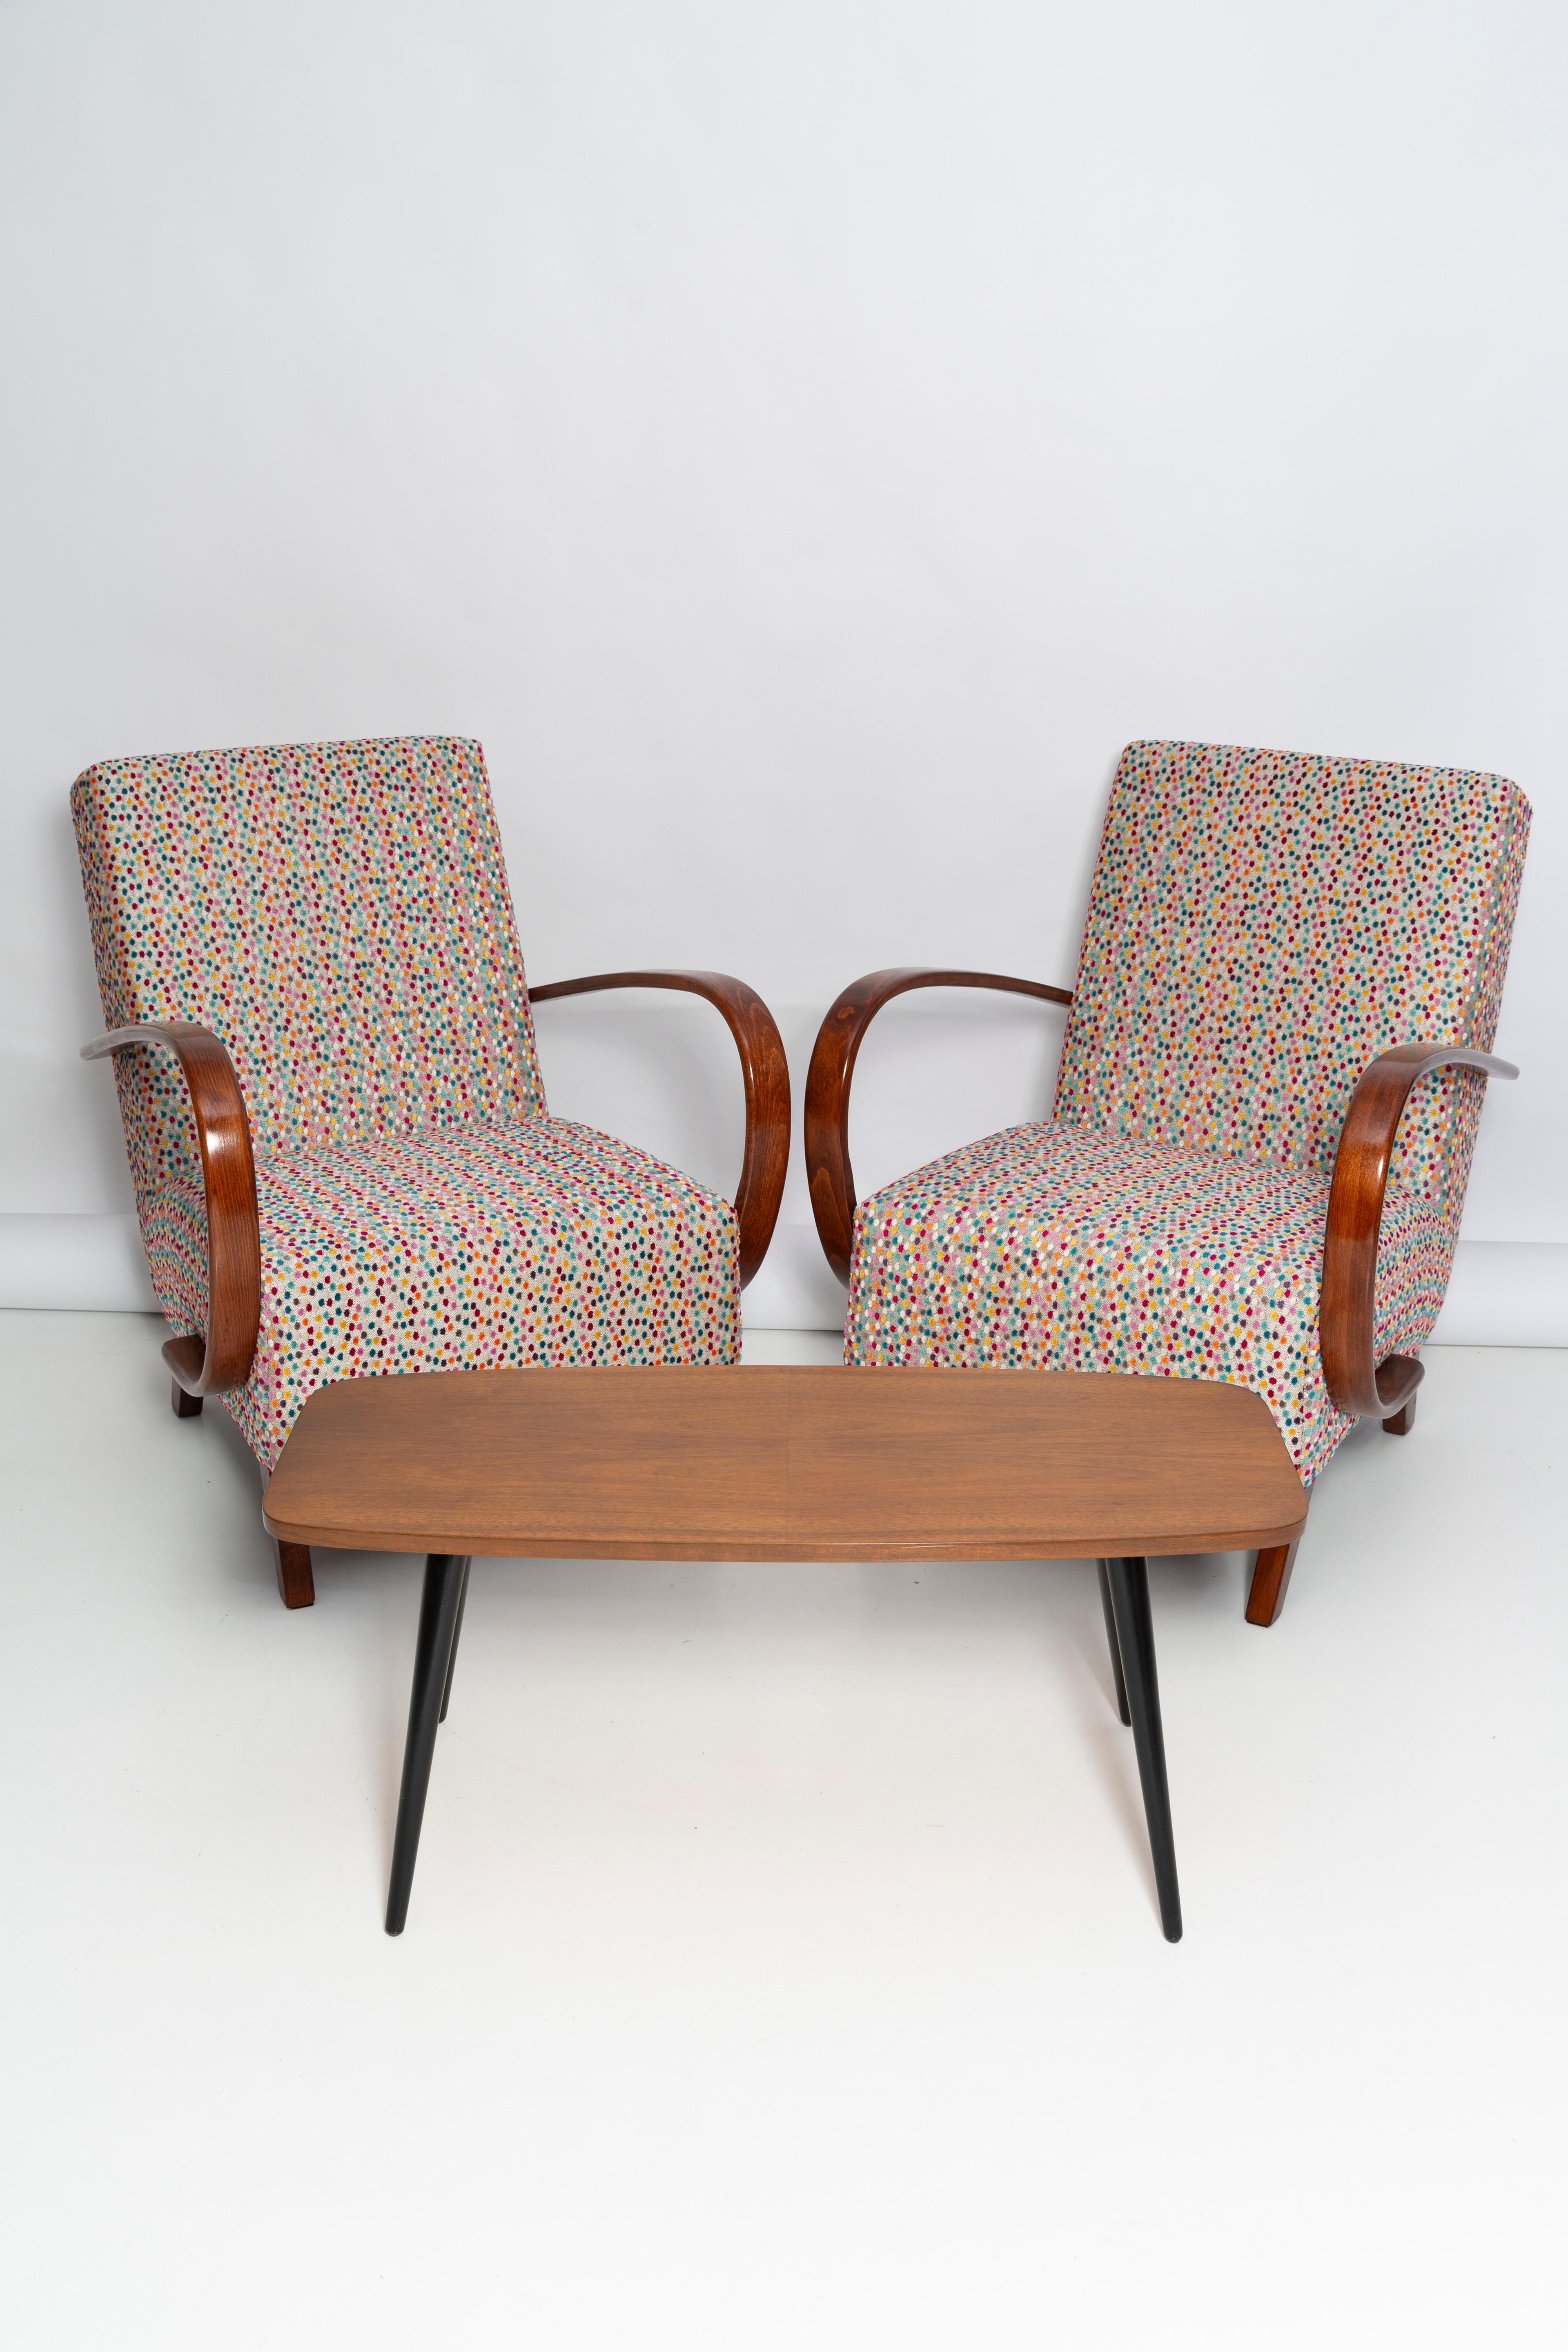 Two Mid Century Dots Velvet Armchairs and Table, Halabala Czech Republic, 1950s For Sale 3